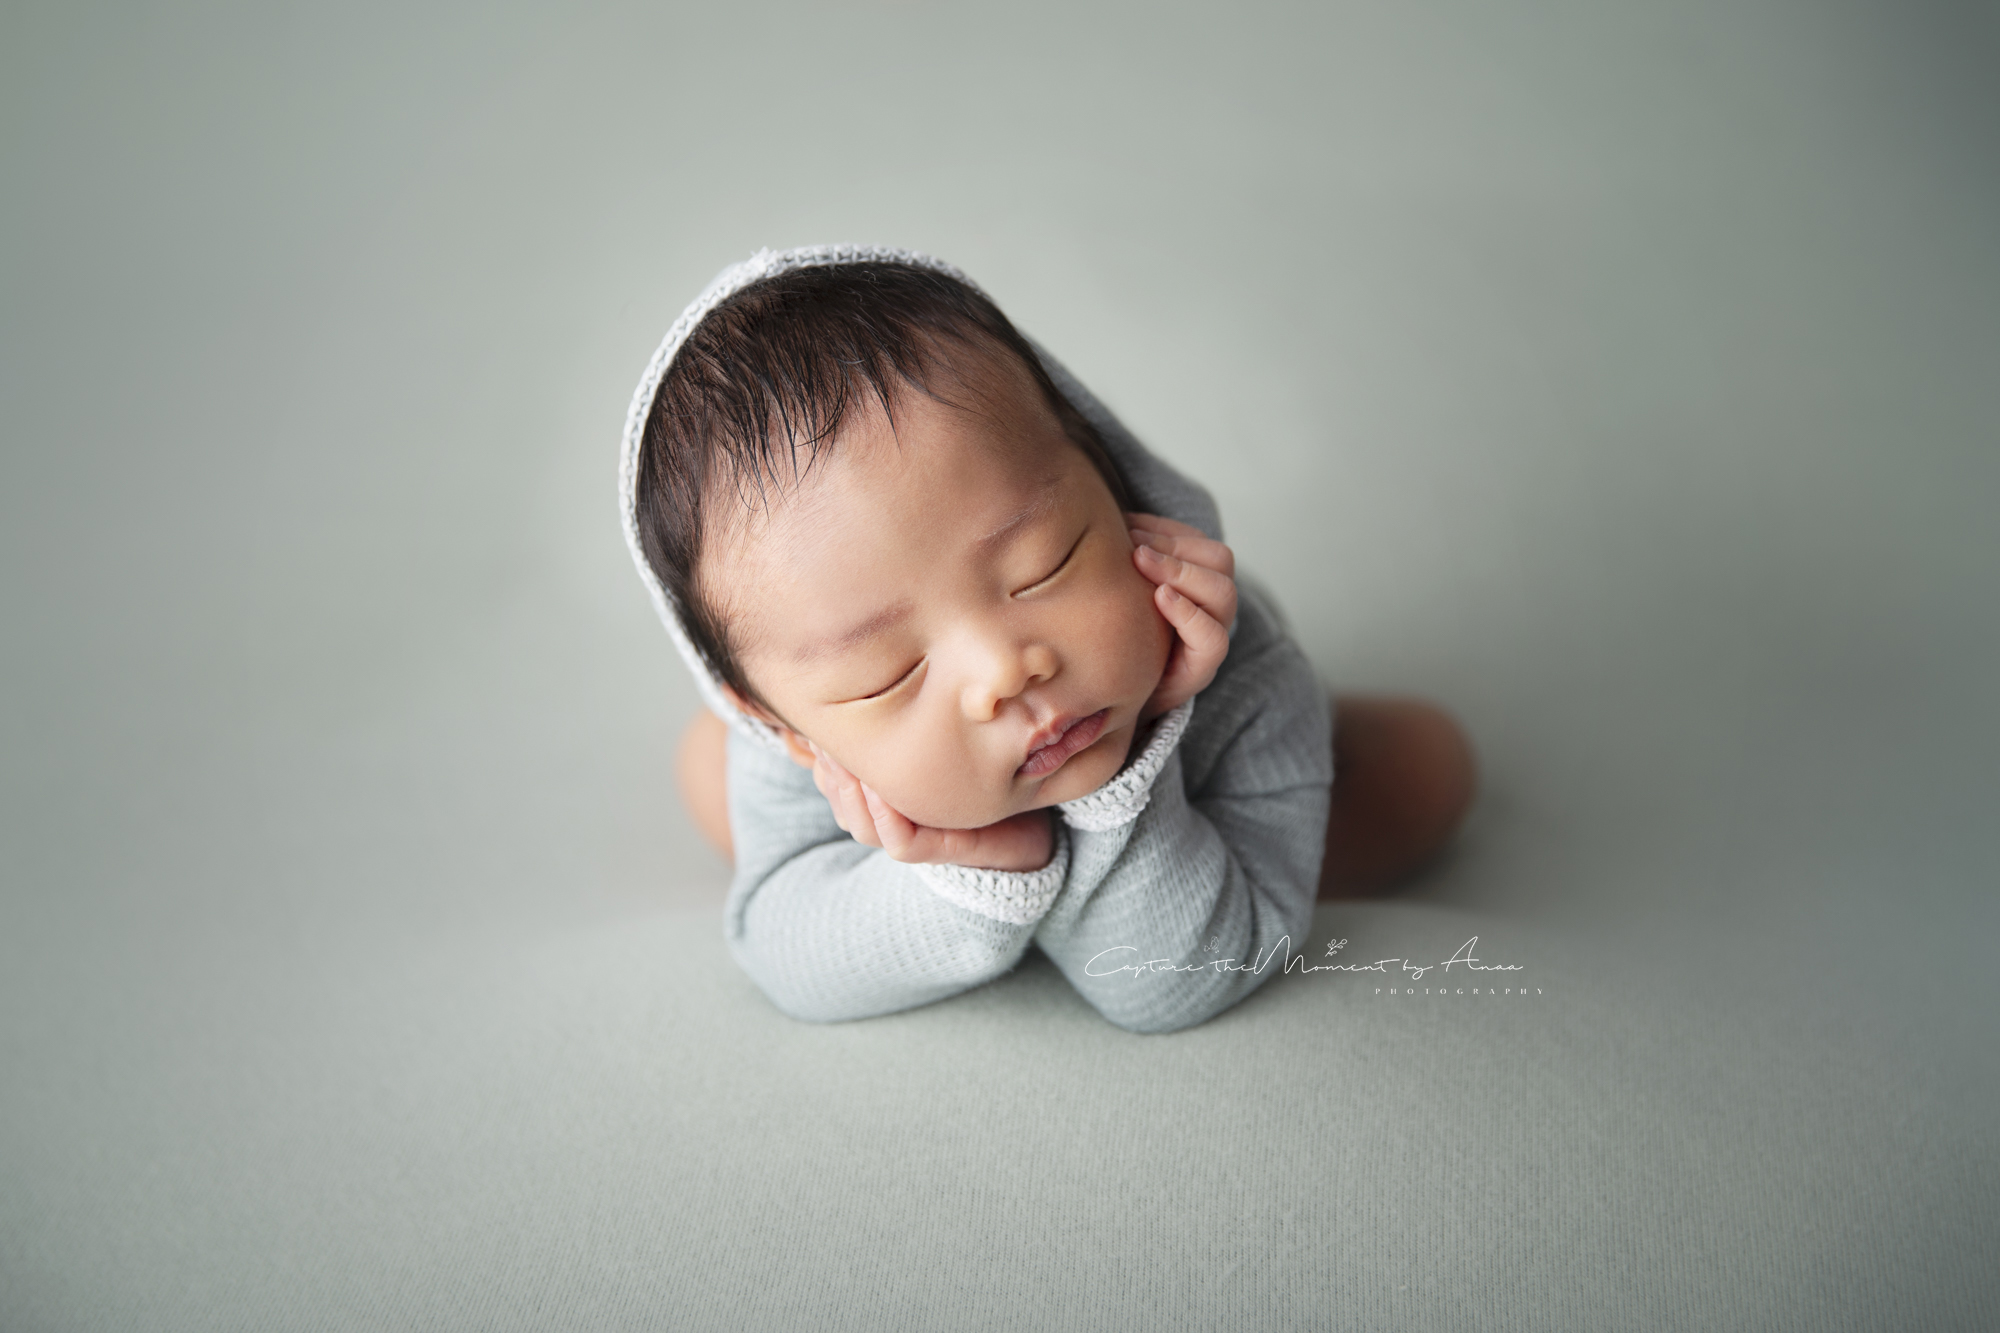 How To Do Tushy Up Pose For Newborn Photography - YouTube